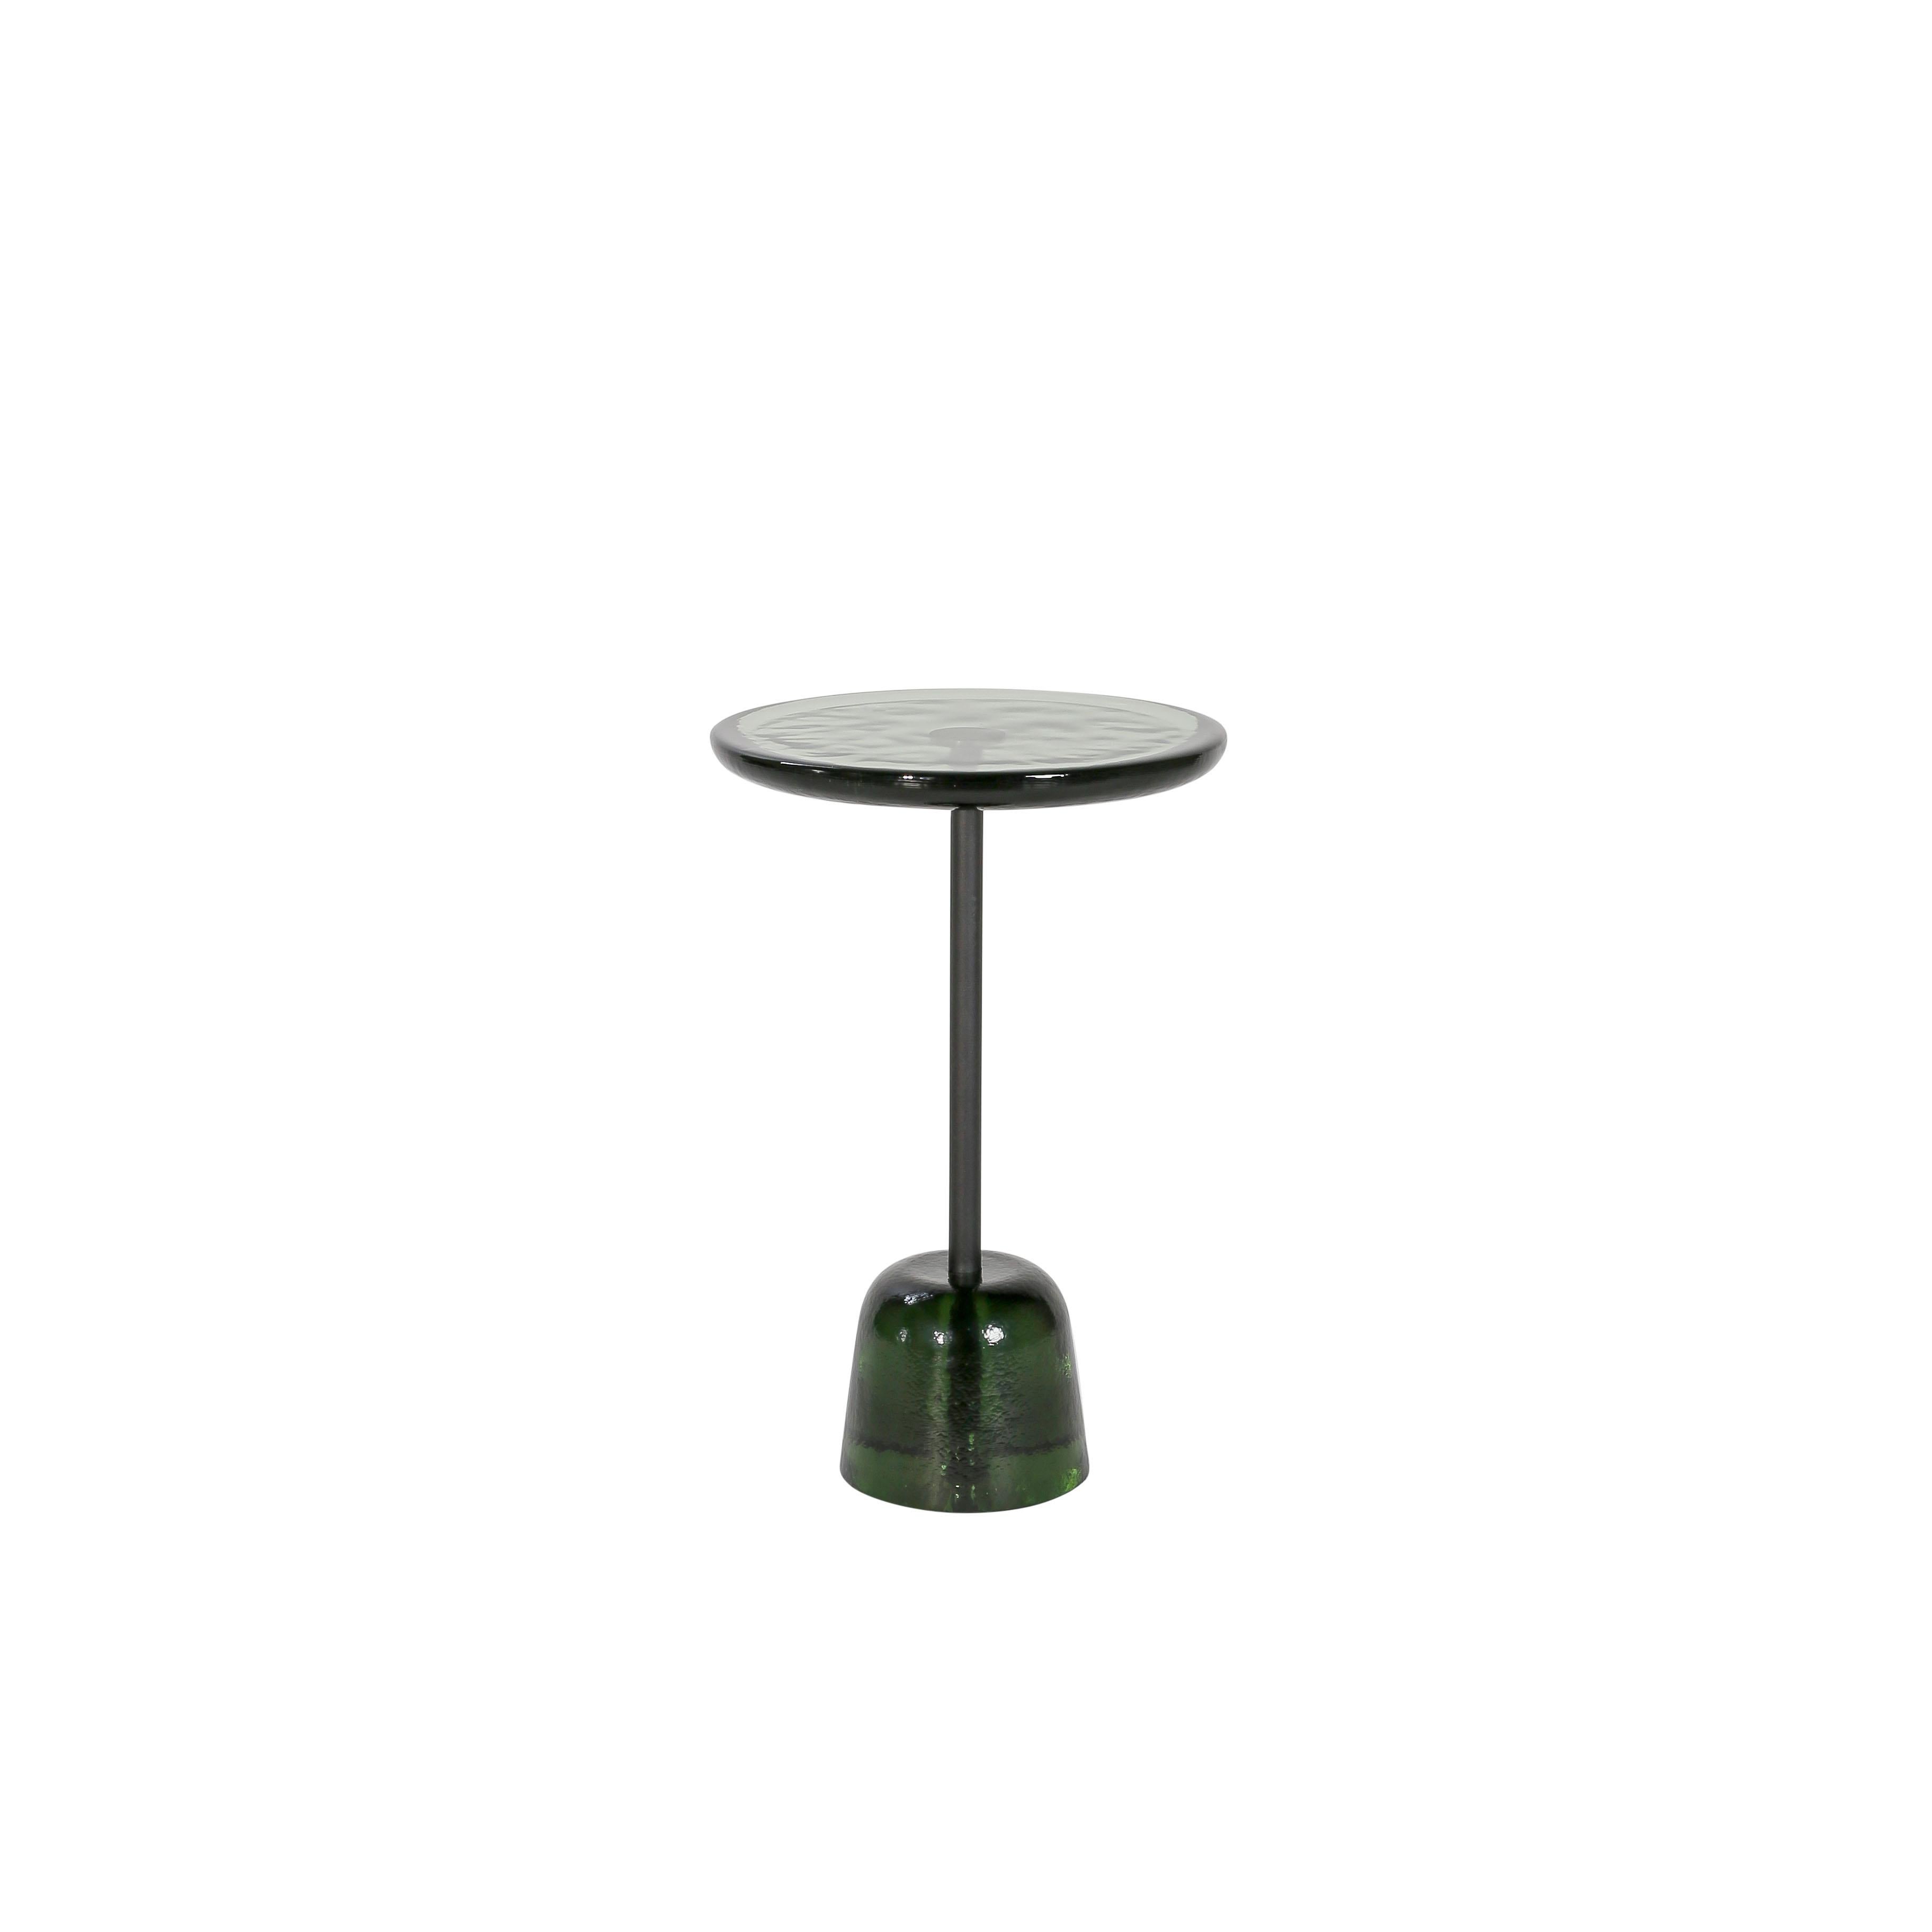 Pina High Green Black Green Side Table by Pulpo
Dimensions: D34 x H52 cm
Materials: glass; brass and steel

Also available in different colours. Please contact us.

Sebastian Herkner’s distinctively tall, skinny side table series pina is inspired by